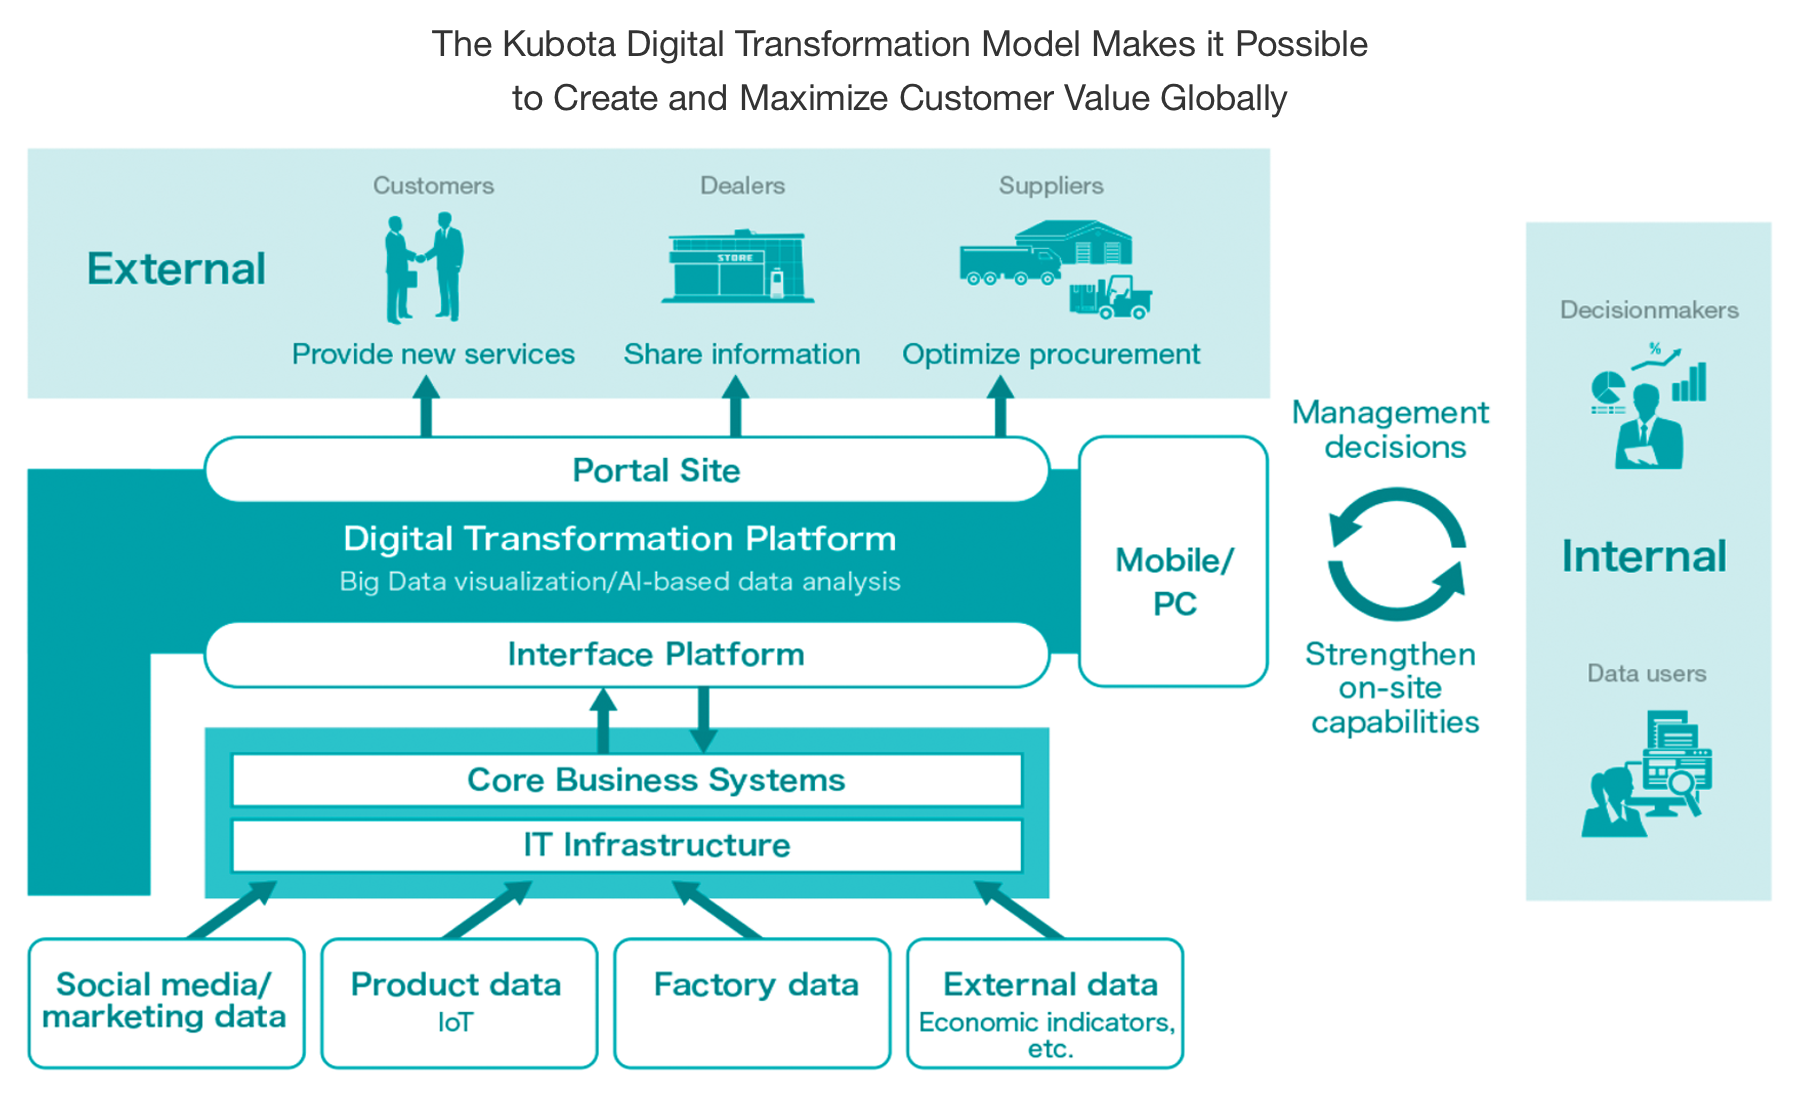 The Kubota Digital Transformation Model Makes it Possible to Create and Maximize Customer Value Globally